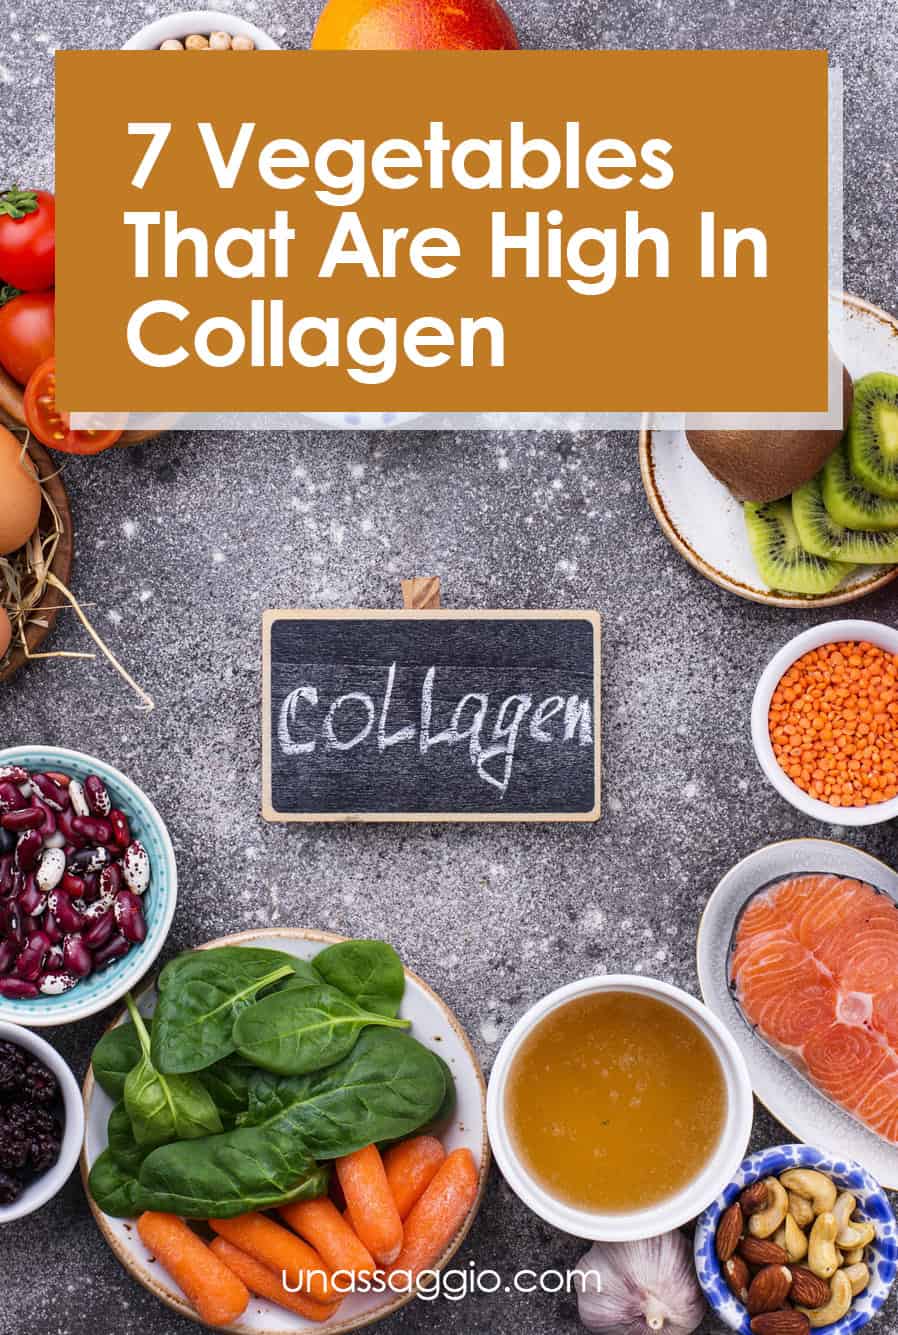 7 Vegetables That Are High In Collagen